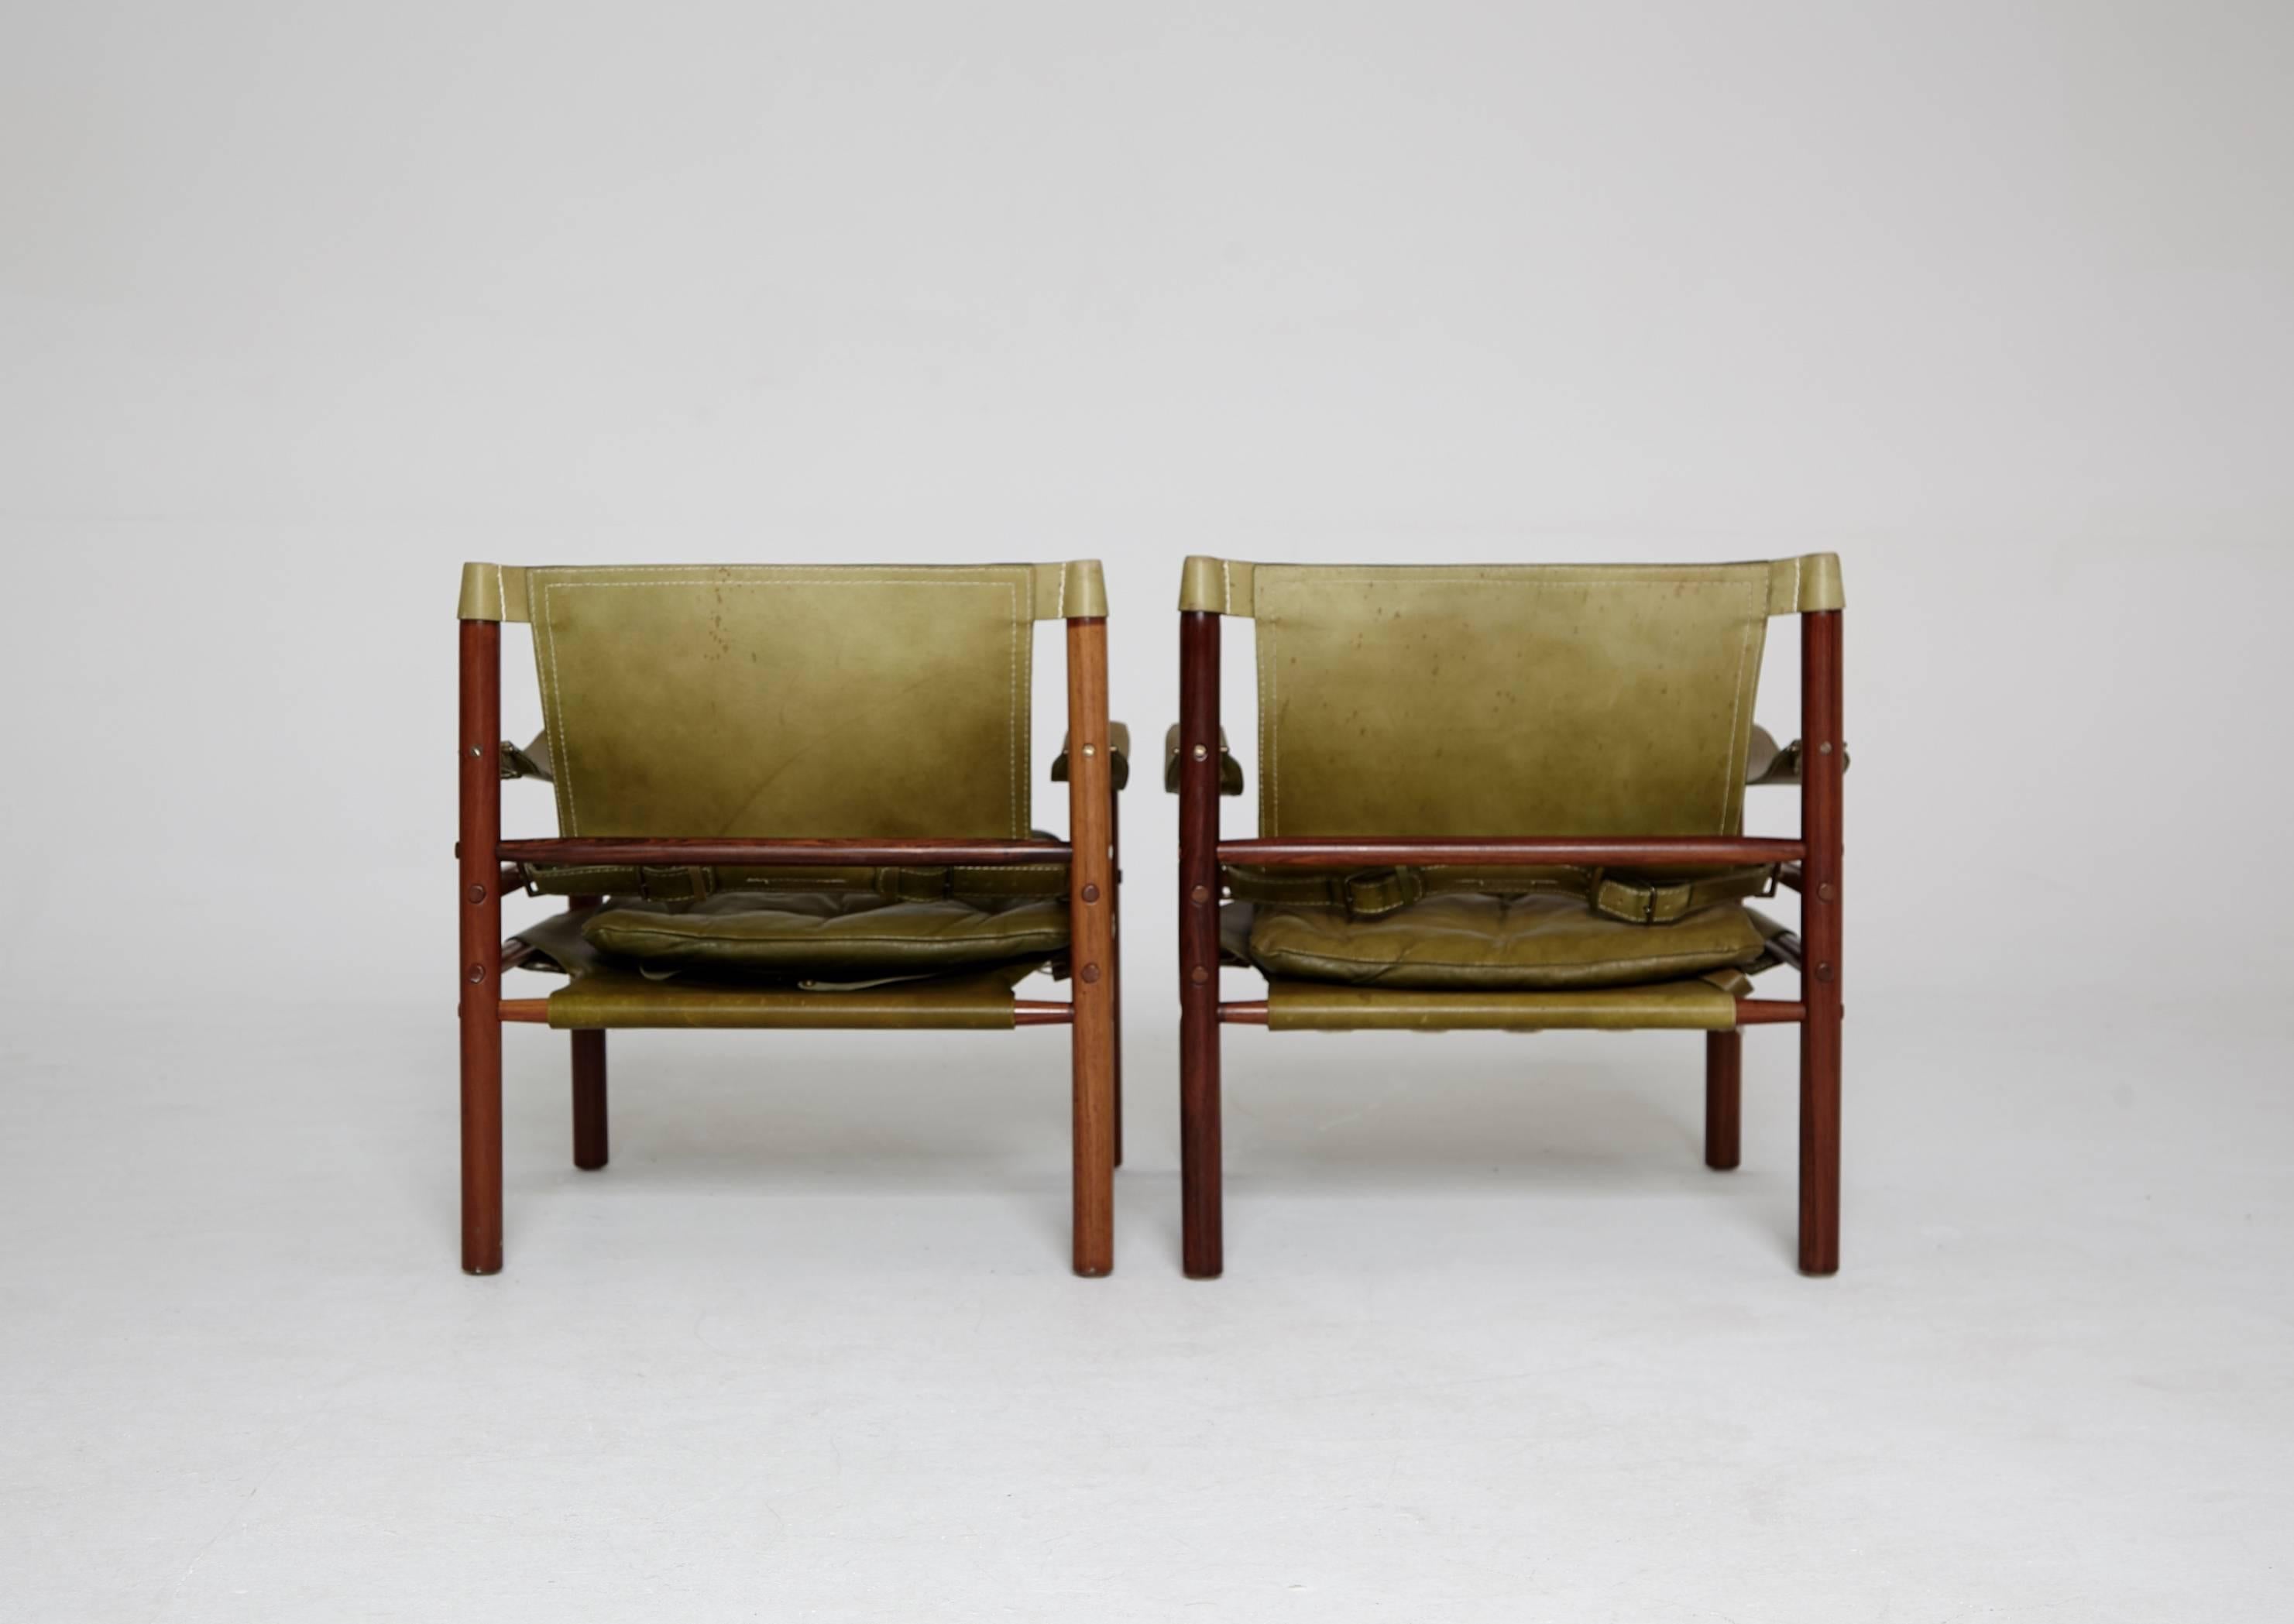 20th Century Pair of Green Leather Arne Norell 'Sirocco' Safari Chairs, Sweden, 1960s-1970s